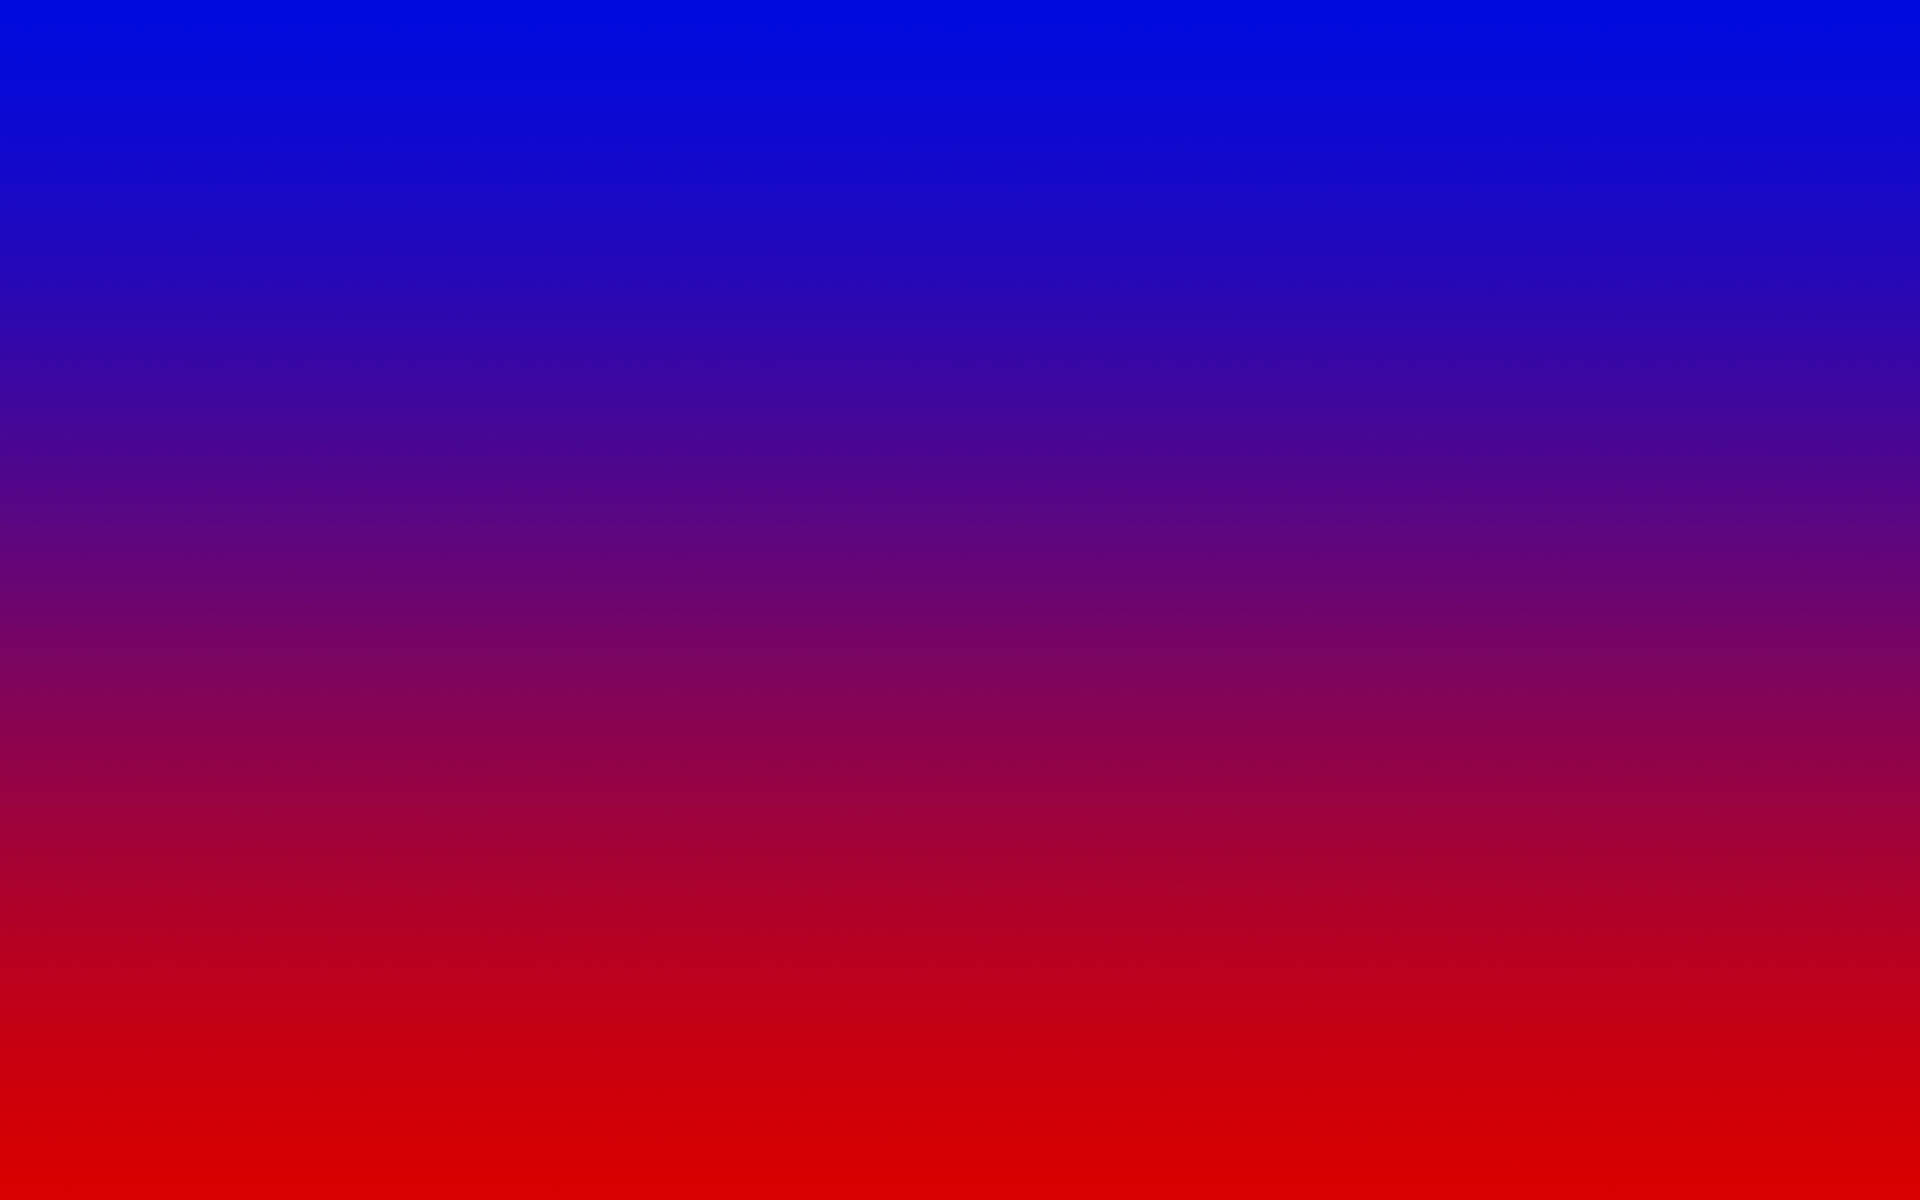 Red And Blue Gradient Background